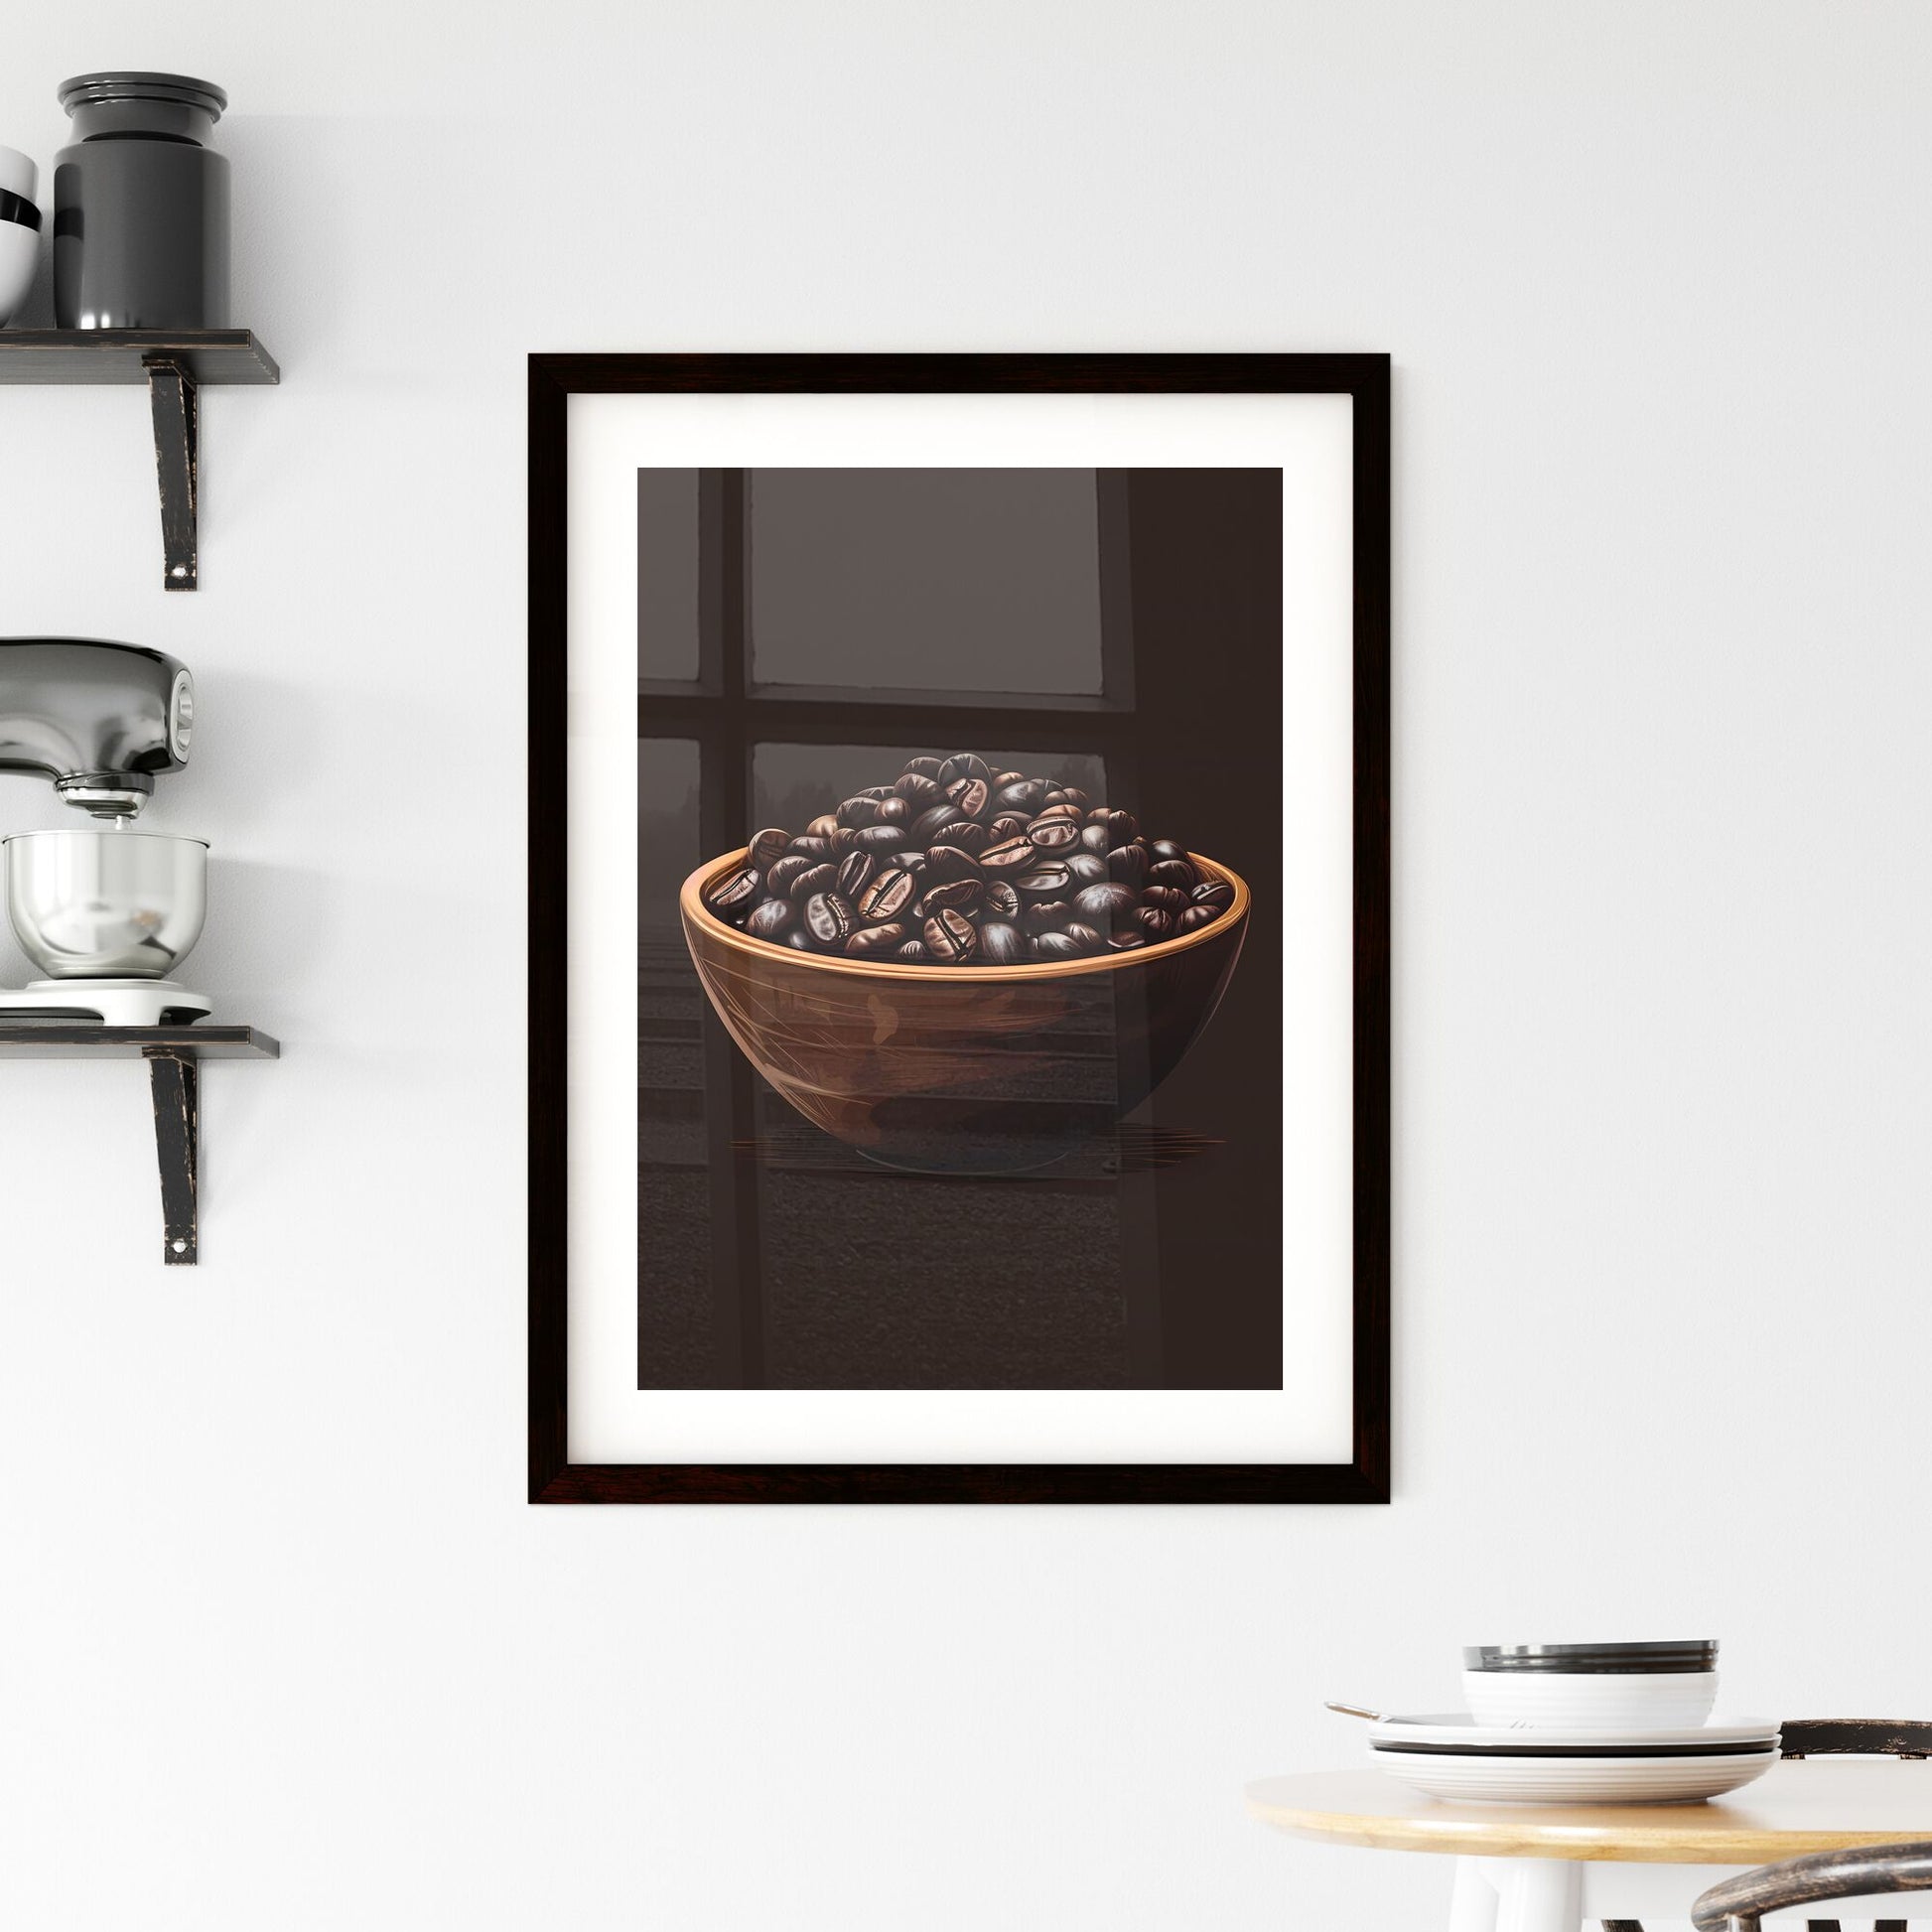 Vibrant Painting of Coffee Beans in a Bowl on Dark Background, Showcasing the Art Default Title